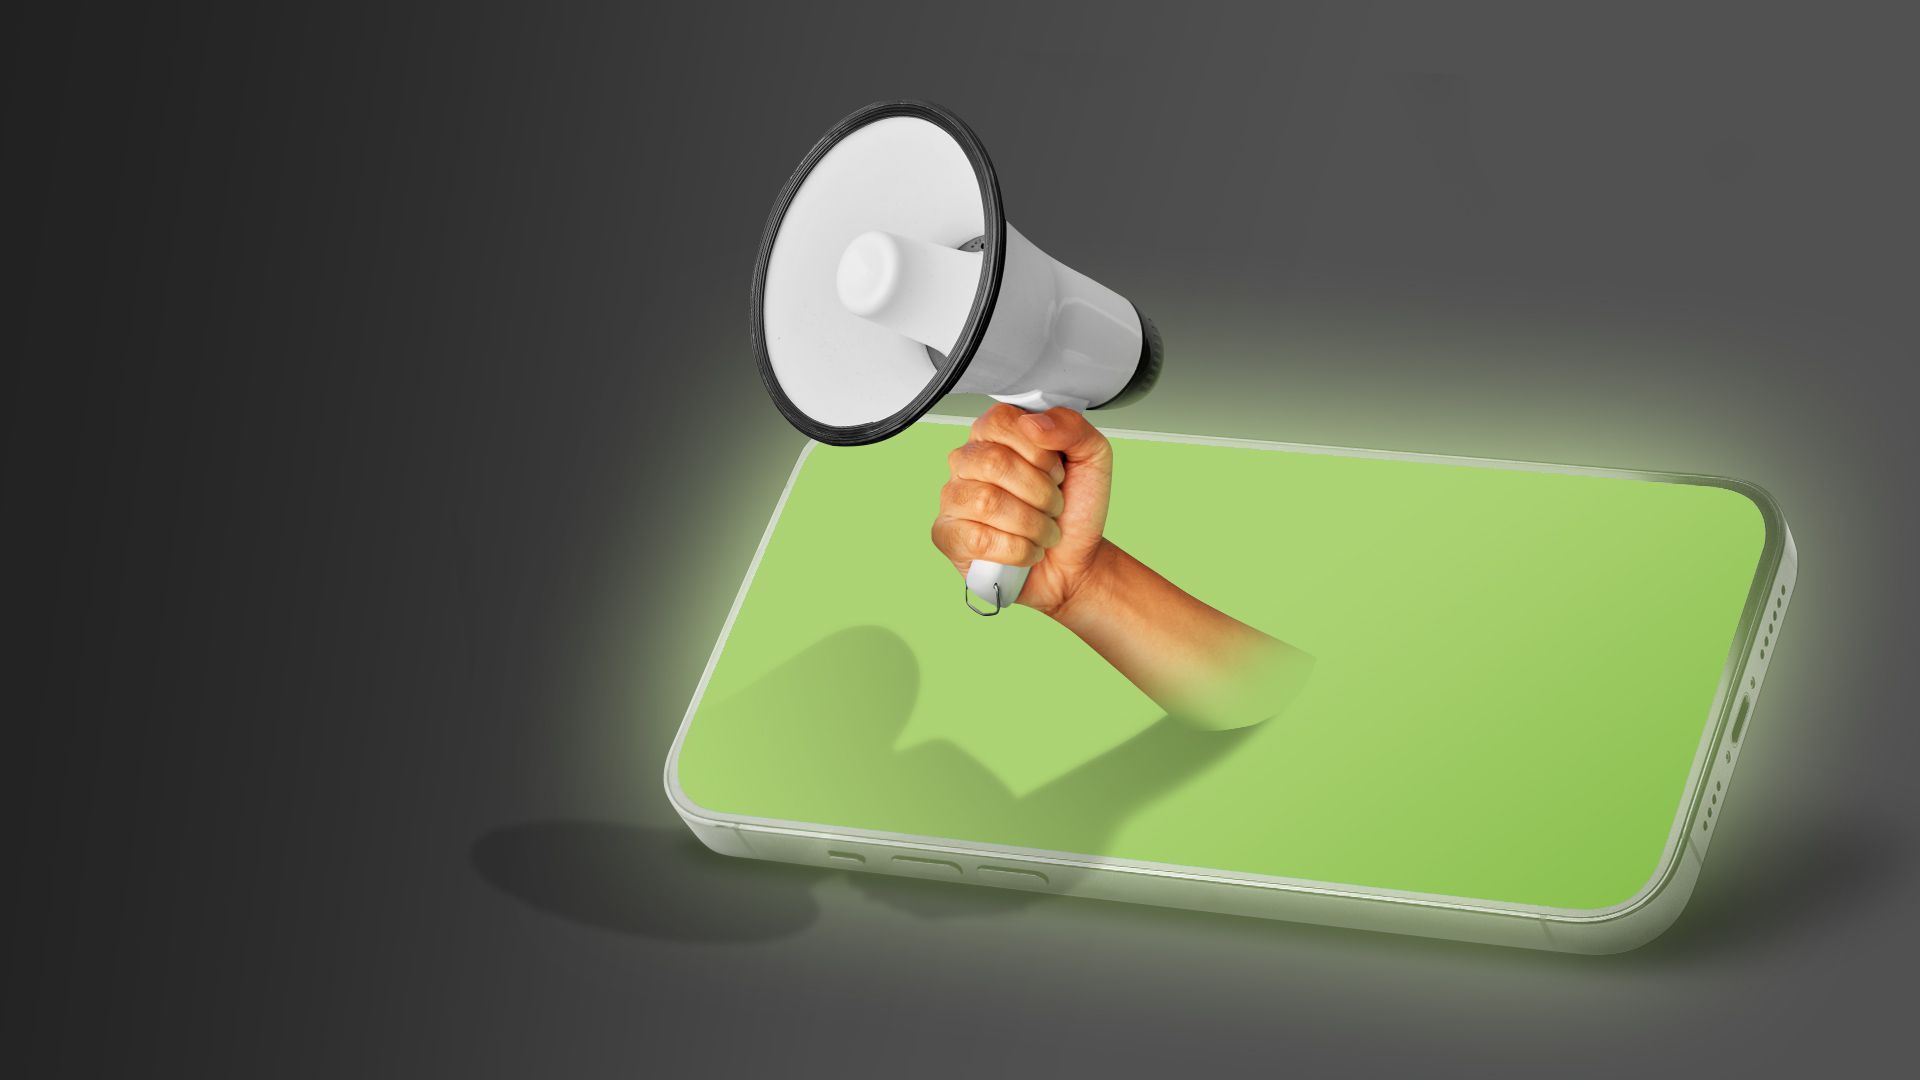 Illustration of a hand with a megaphone coming out from a mobile phone screen.  